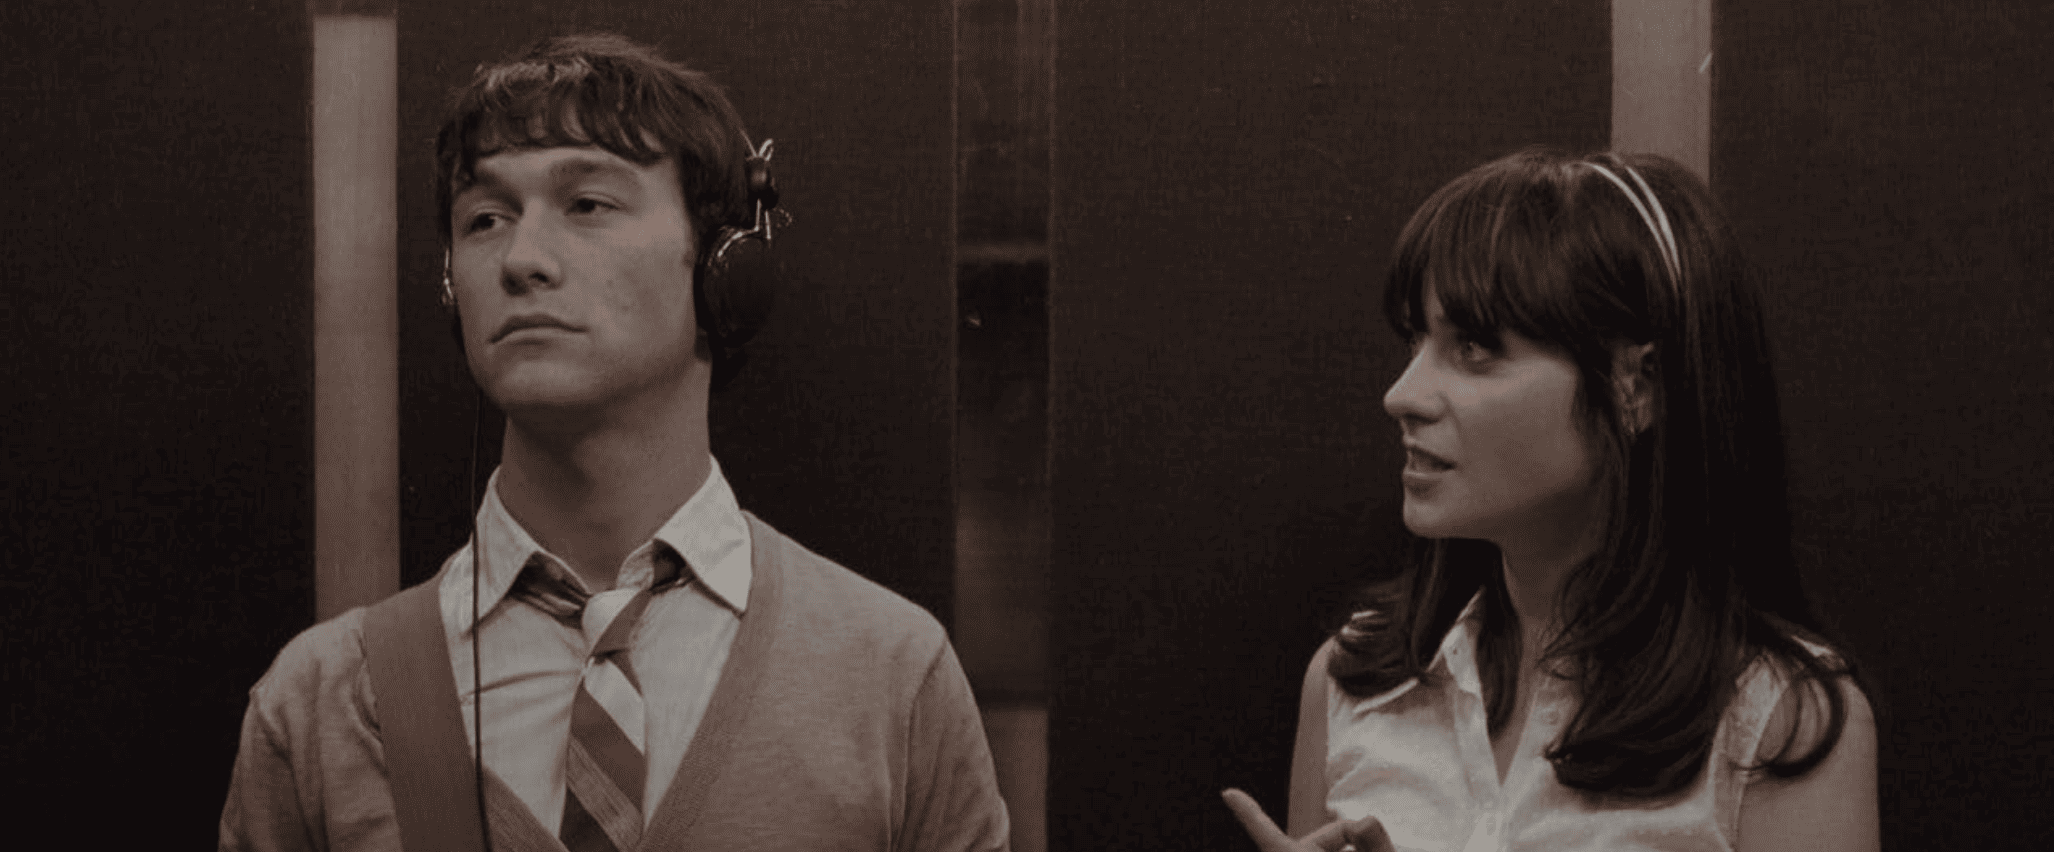 A man listens to headphones as a woman tries to talk to him in an elevator in this image from Searchlight Pictures.